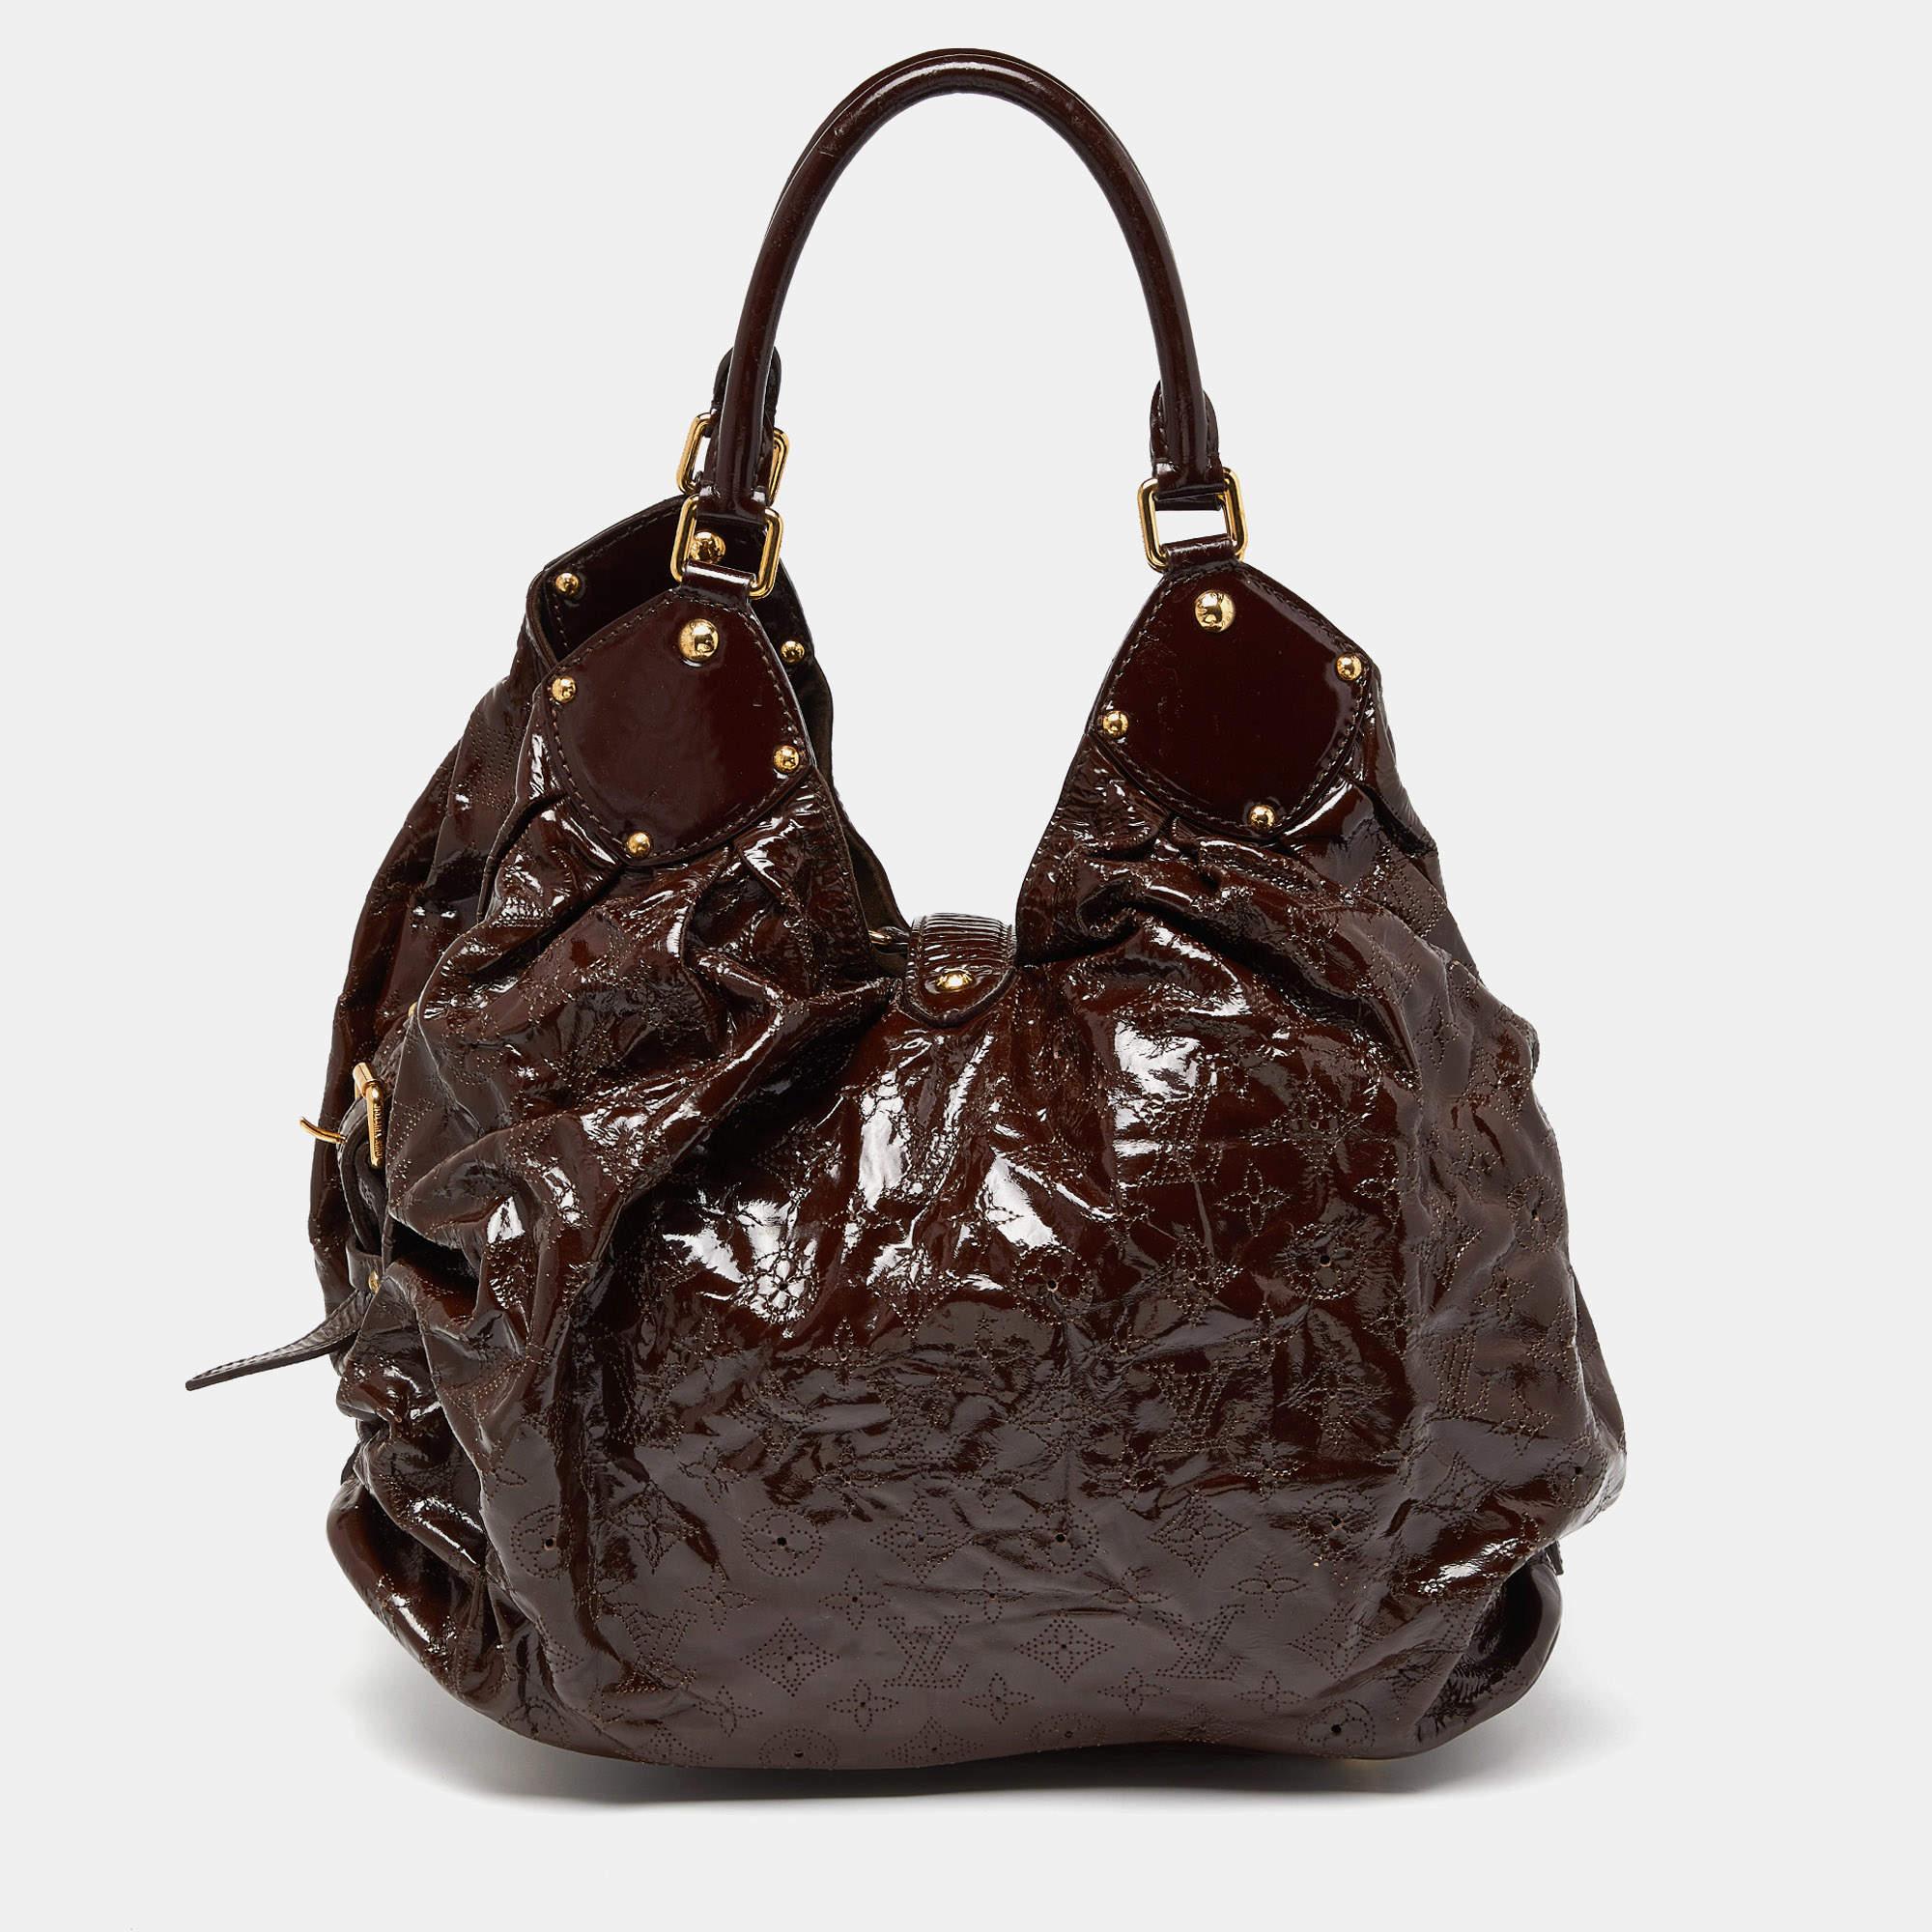 This LV bag is a result of blending high crafting skills with a practical design. It arrives with a durable exterior completed by luxe detailing. It is an accessory that you can count on.

